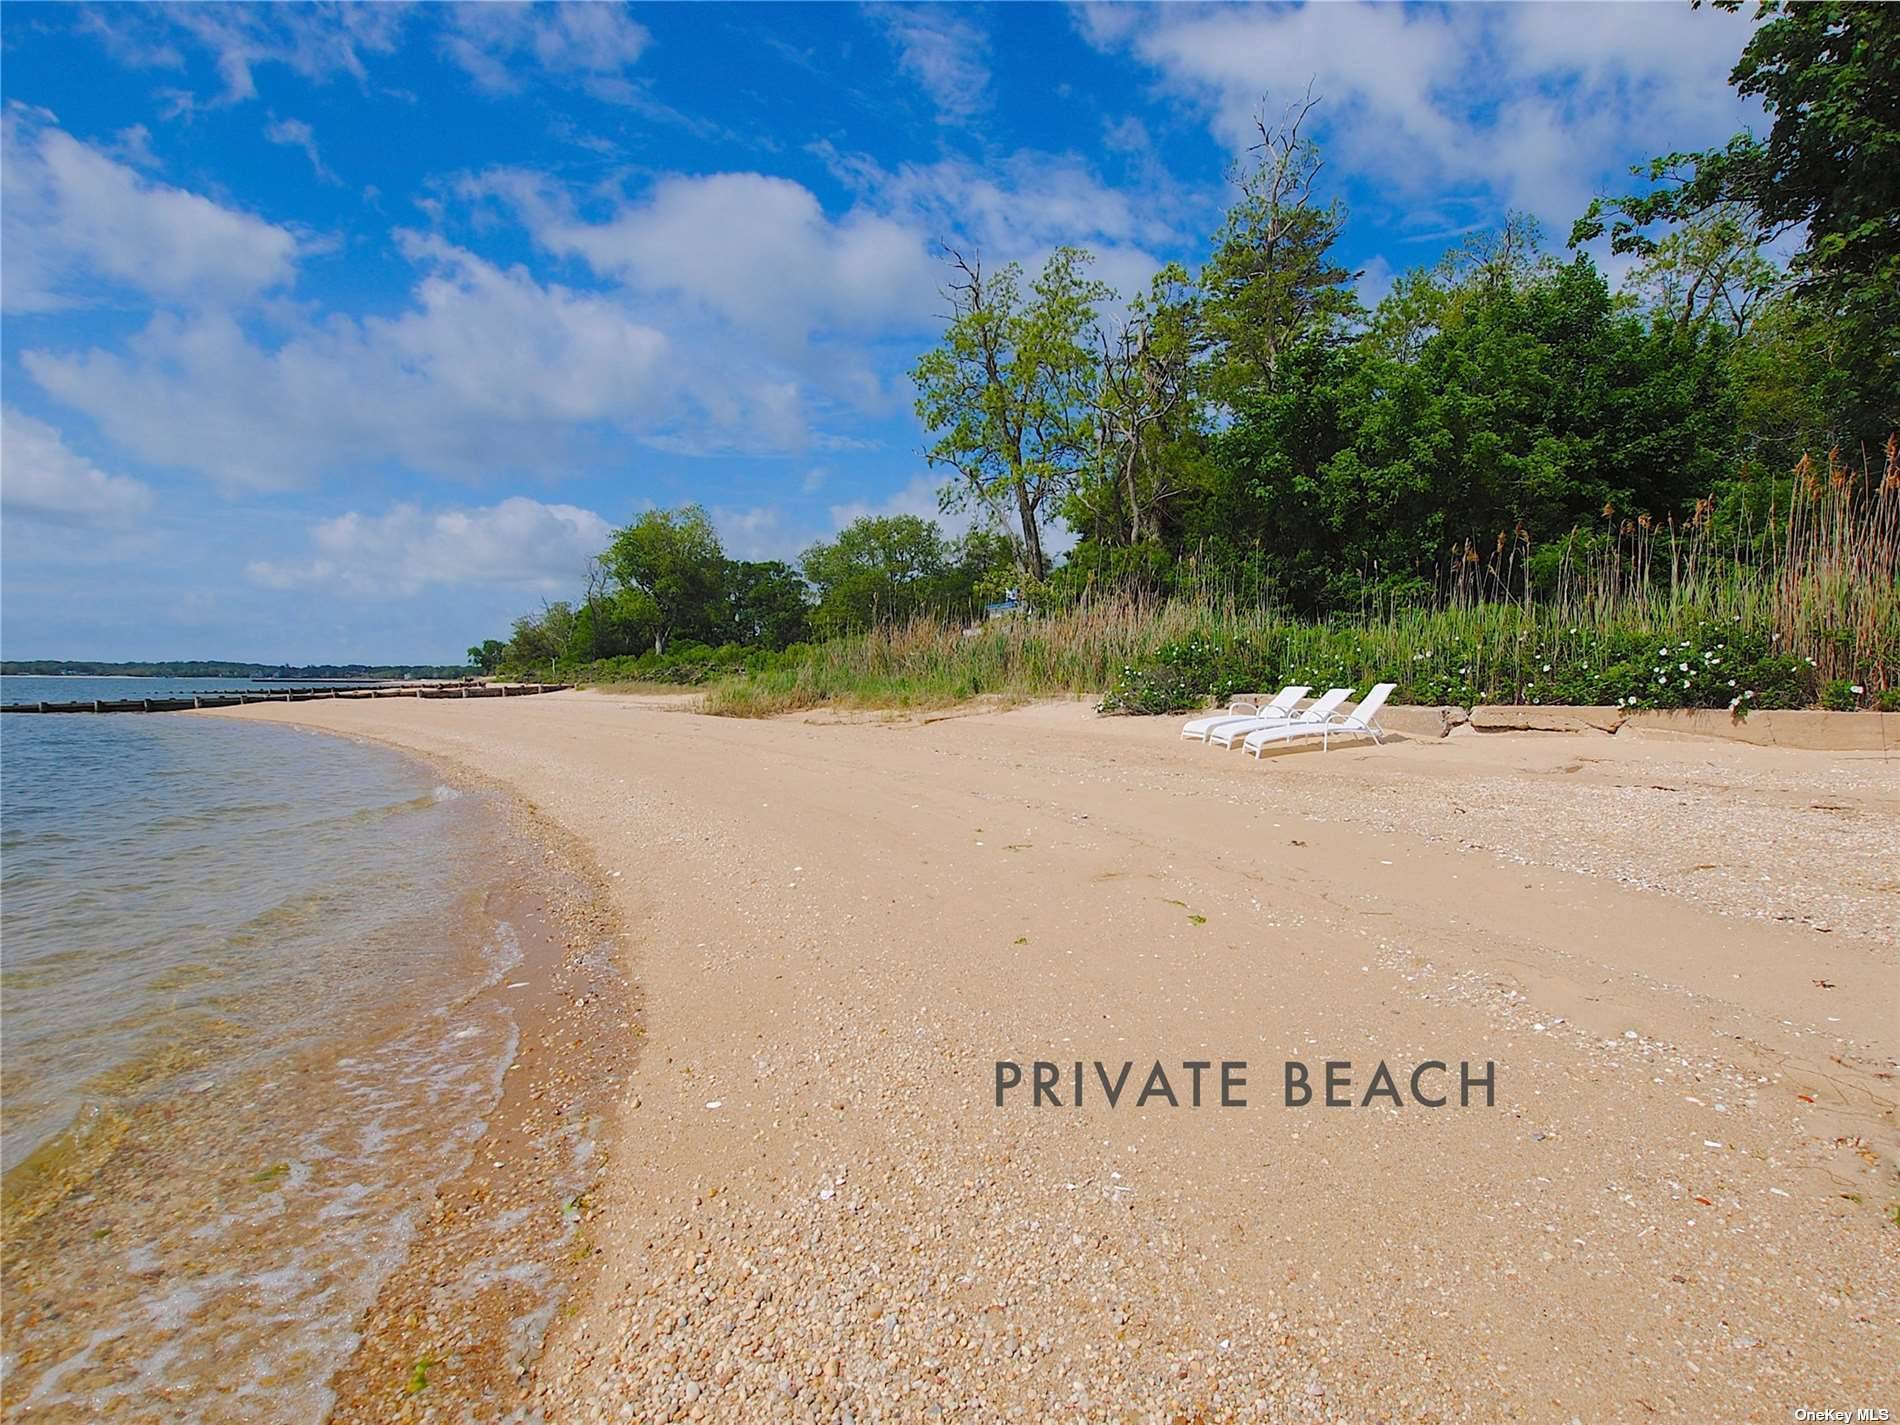 Quintessential waterfront North Fork farmhouse with private sandy beach on Southold Bay, part of the Peconic Estuary.